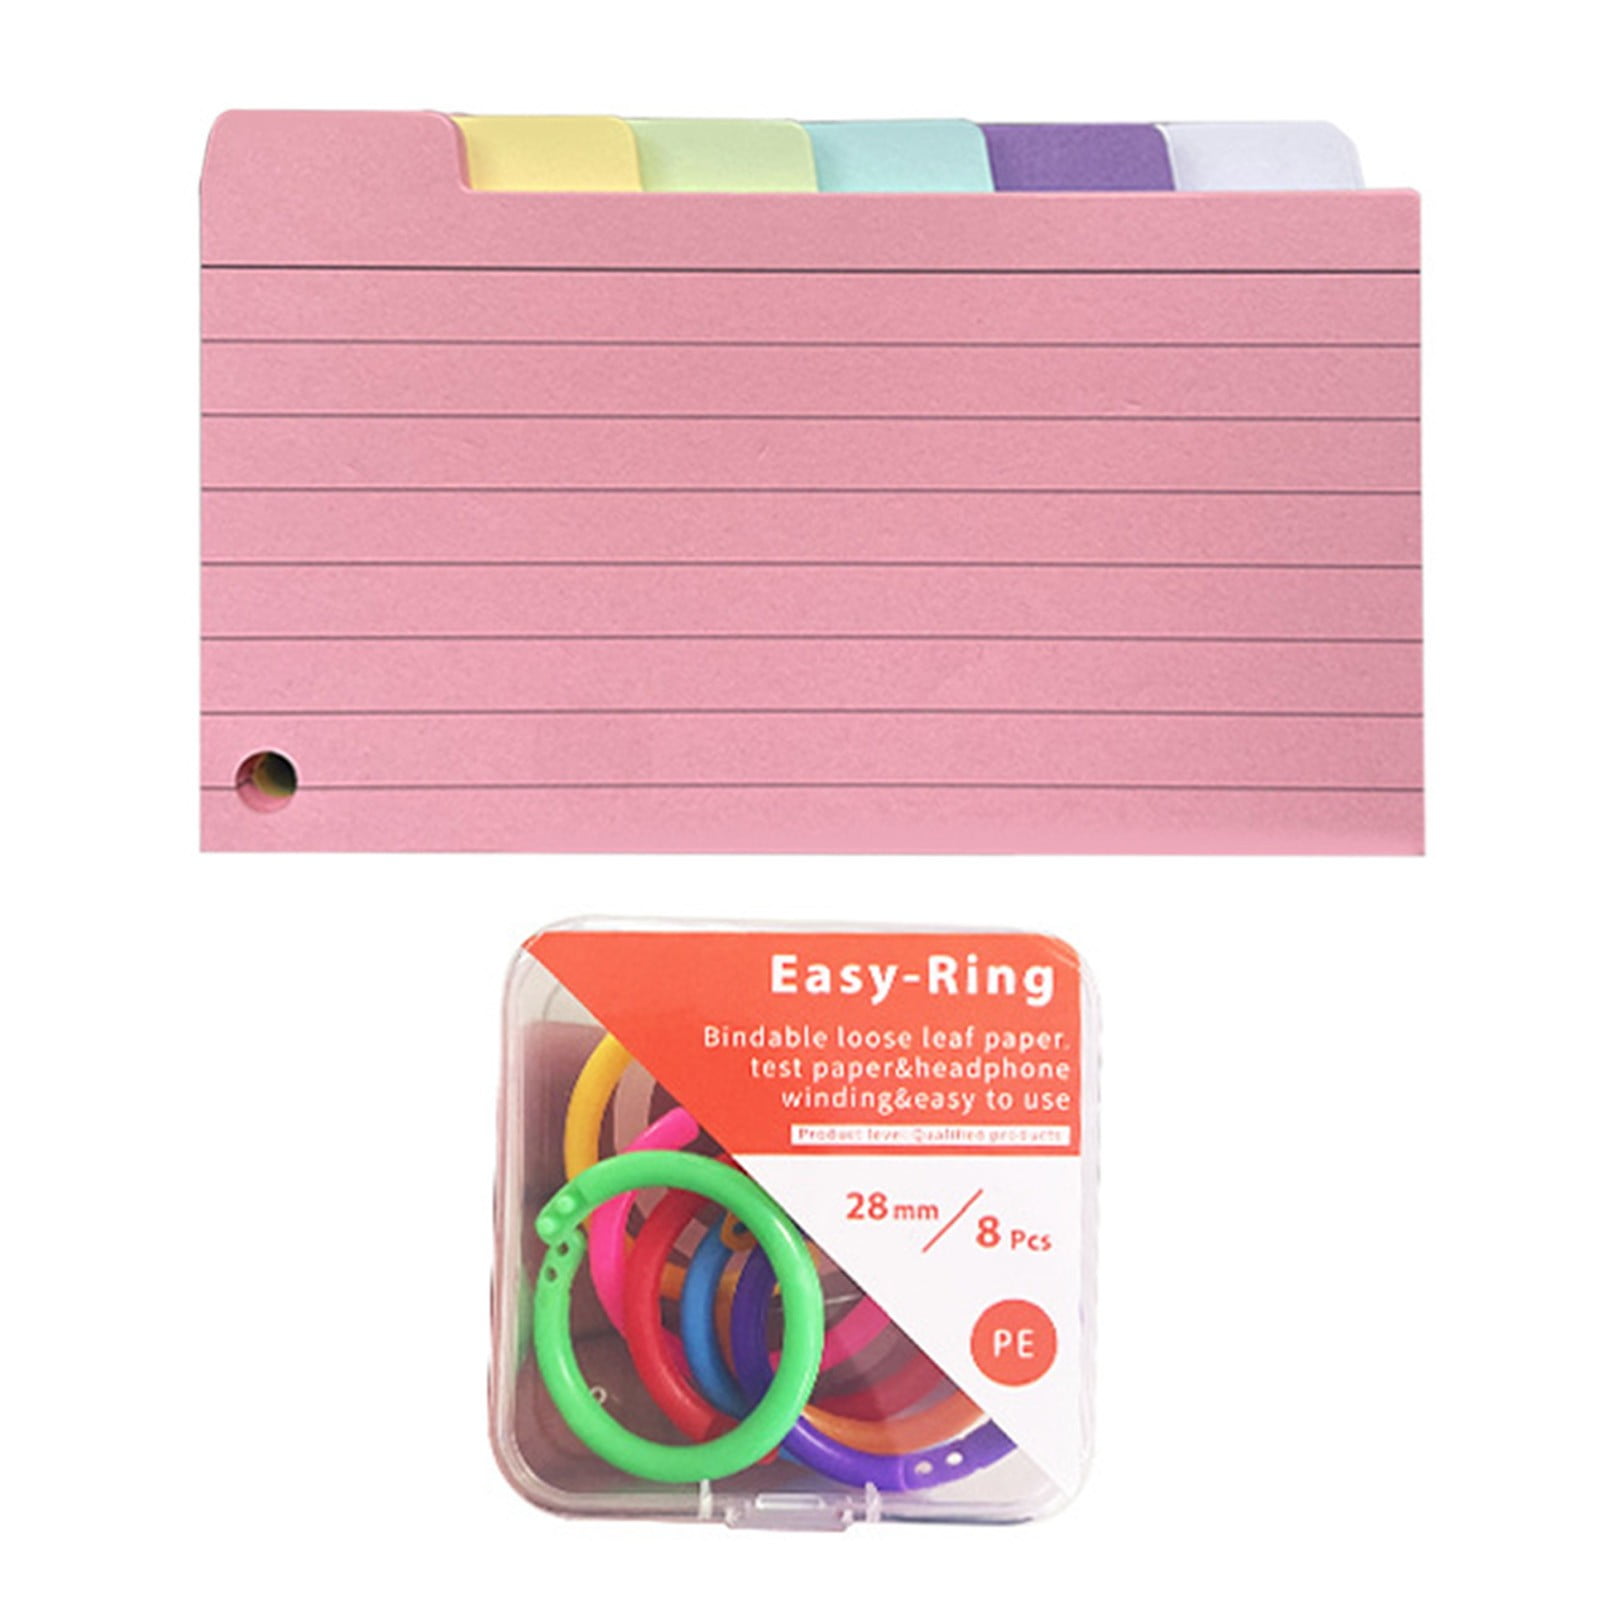 Use flashcards for your exams - Flashcards and Stationery